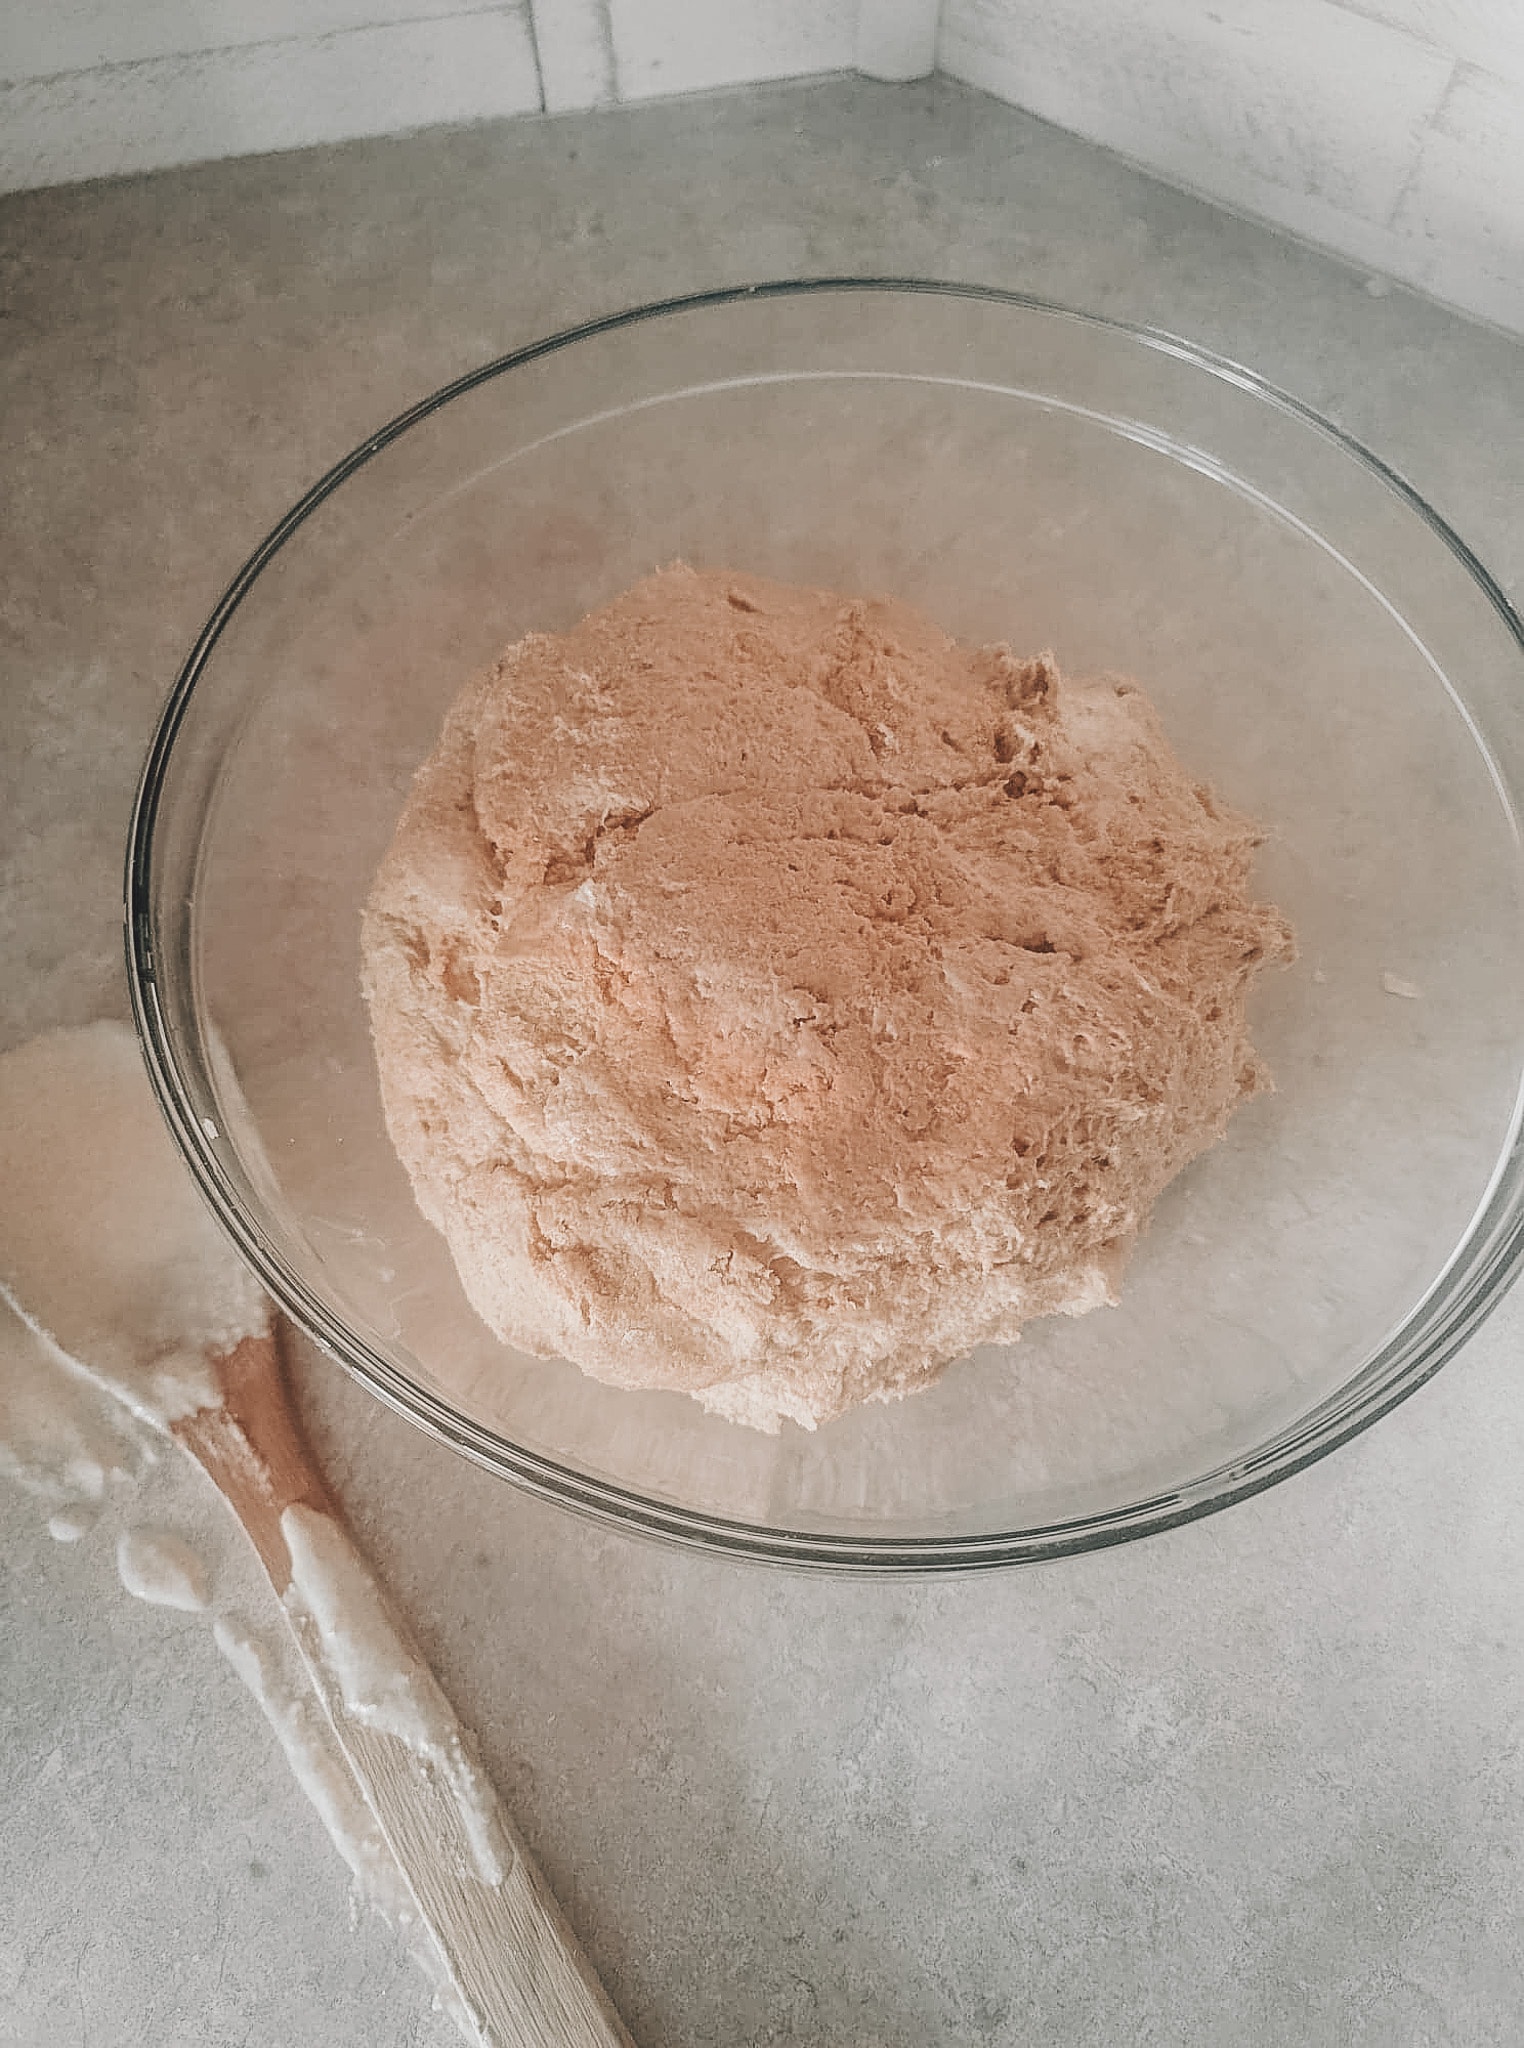 Place dough in bowl and cover. Allow it to rise for 12-24 hours. Do not overproof.